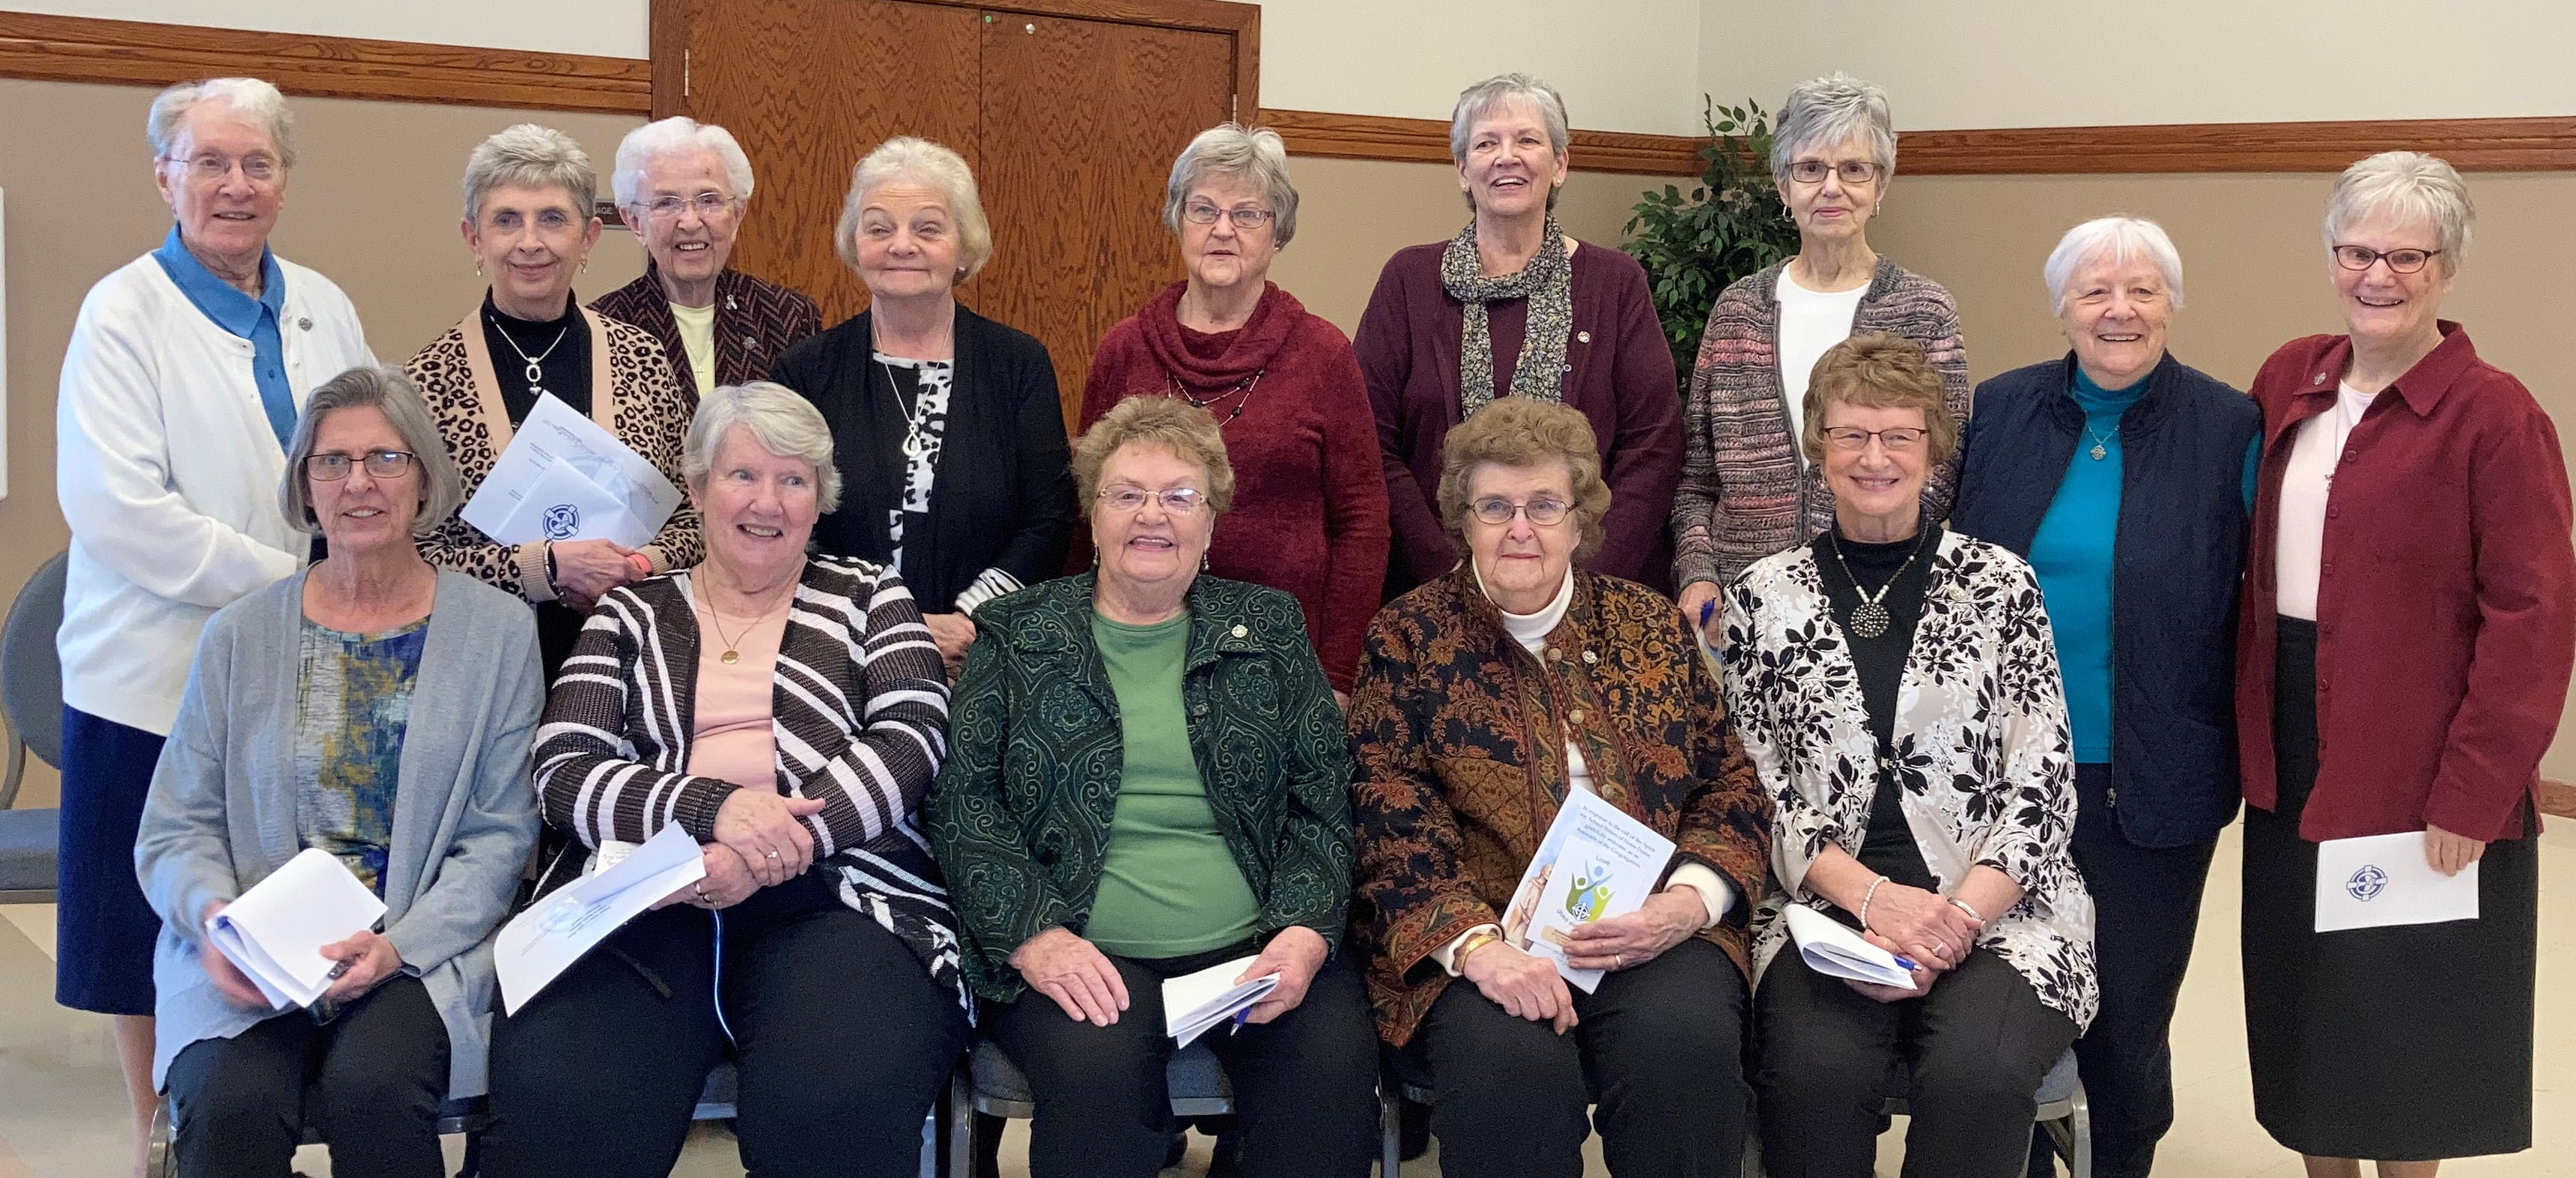 Ten new SSND associates made initial covenant at St. Anthony Parish in Effingham, Illinois.